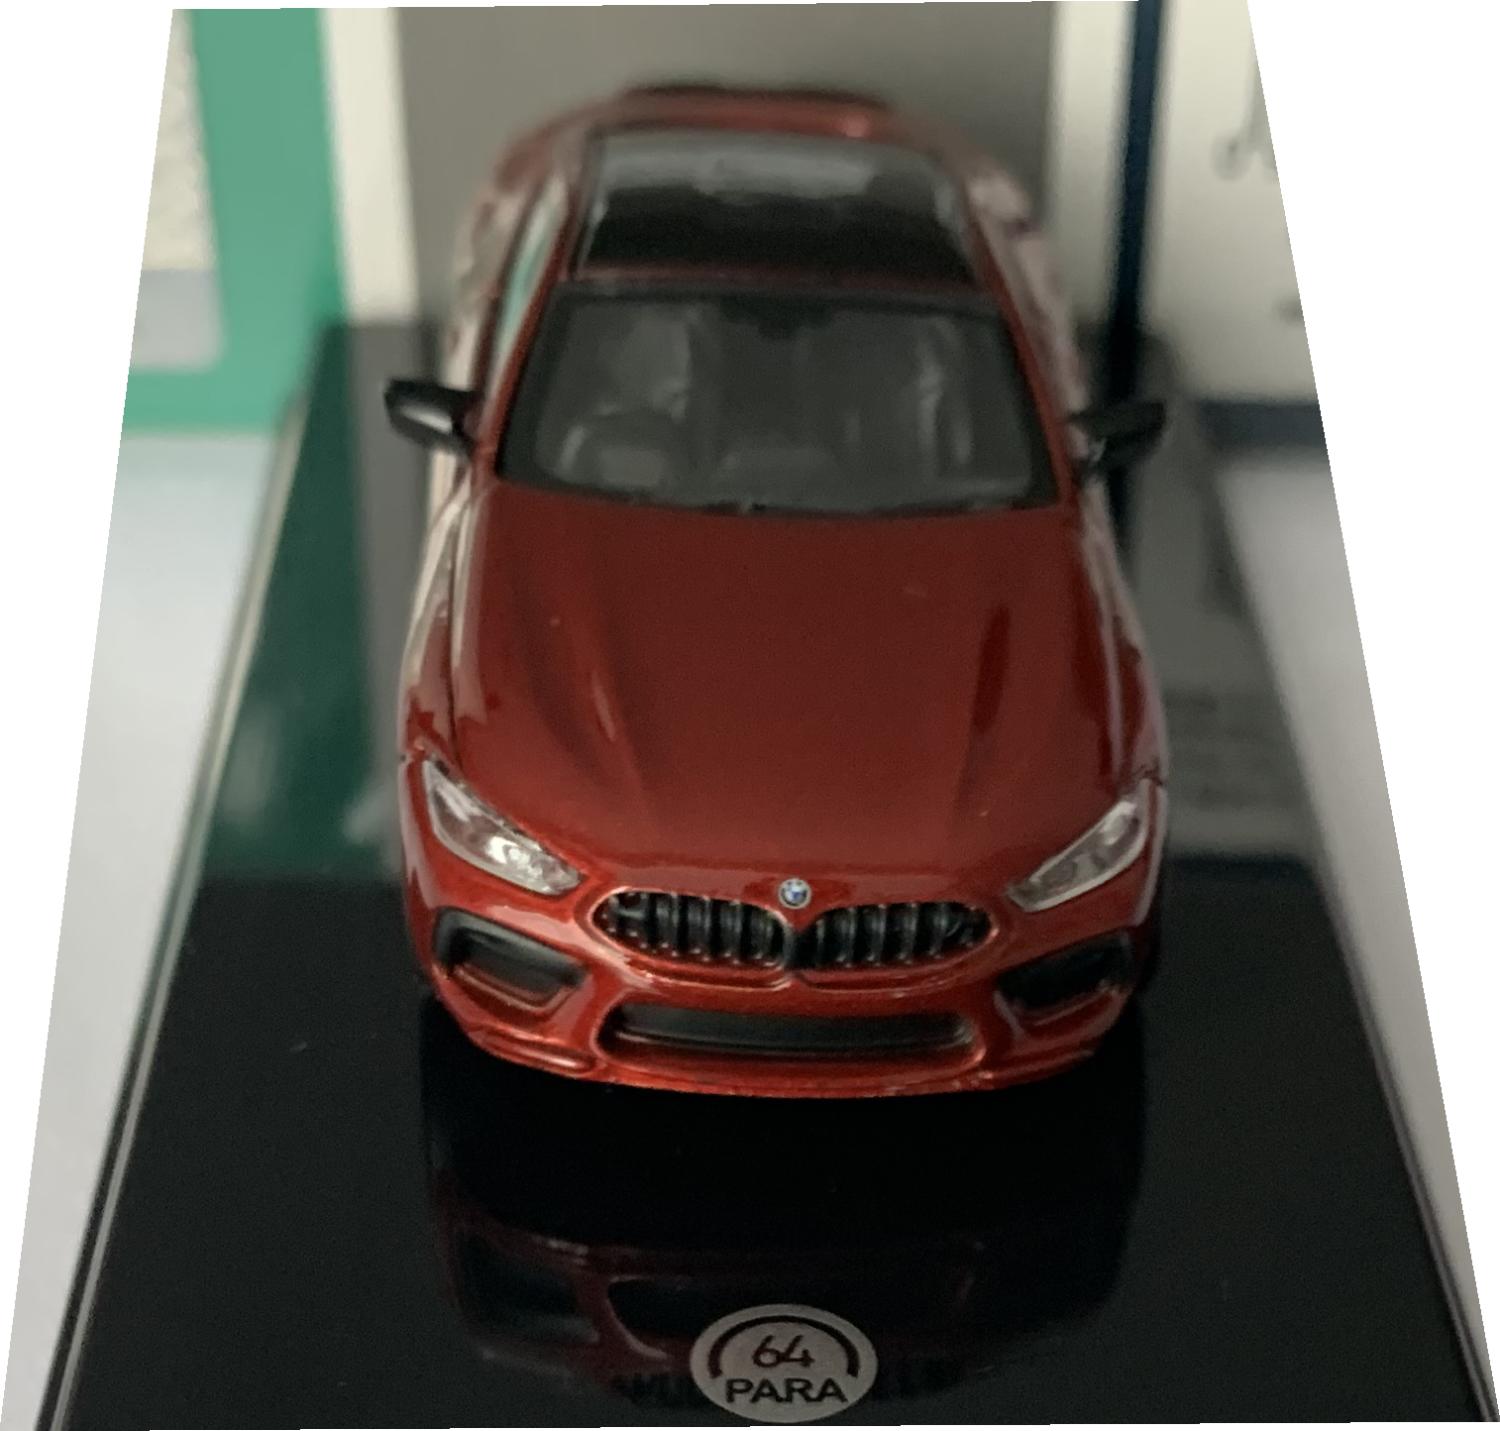 BMW M8 Coupe in Motegi red 1:64 scale model from Paragon Models